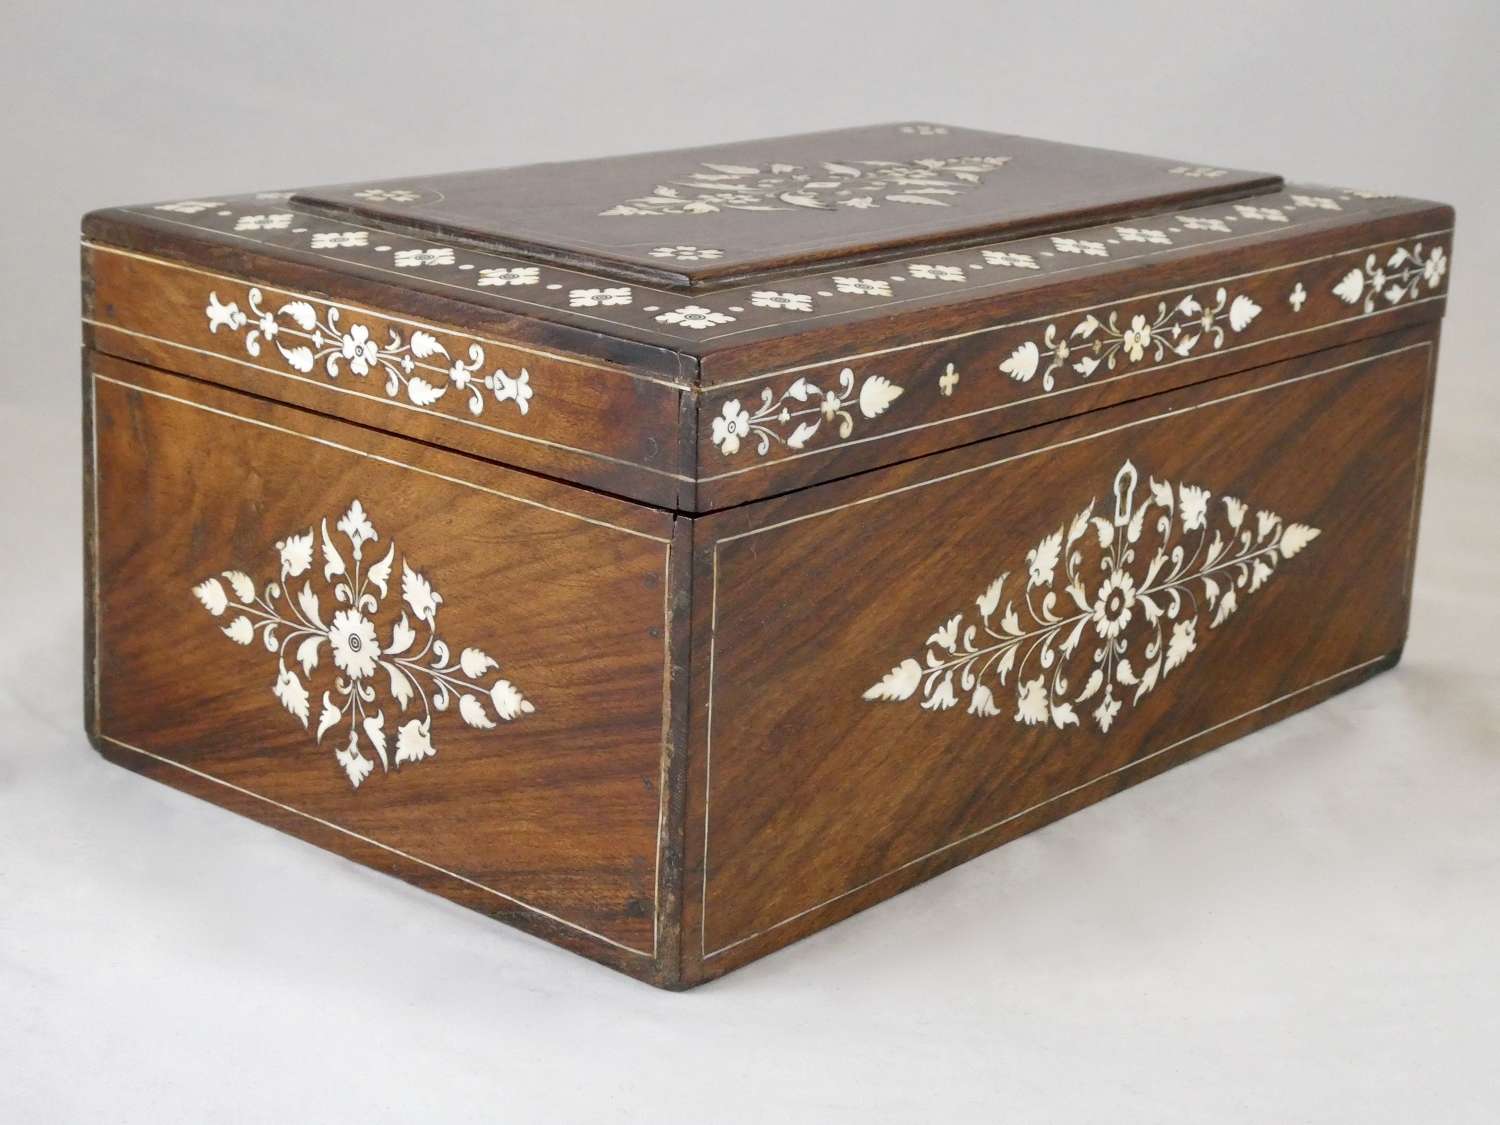 Late 19th Century Anglo-Indian Writing Box